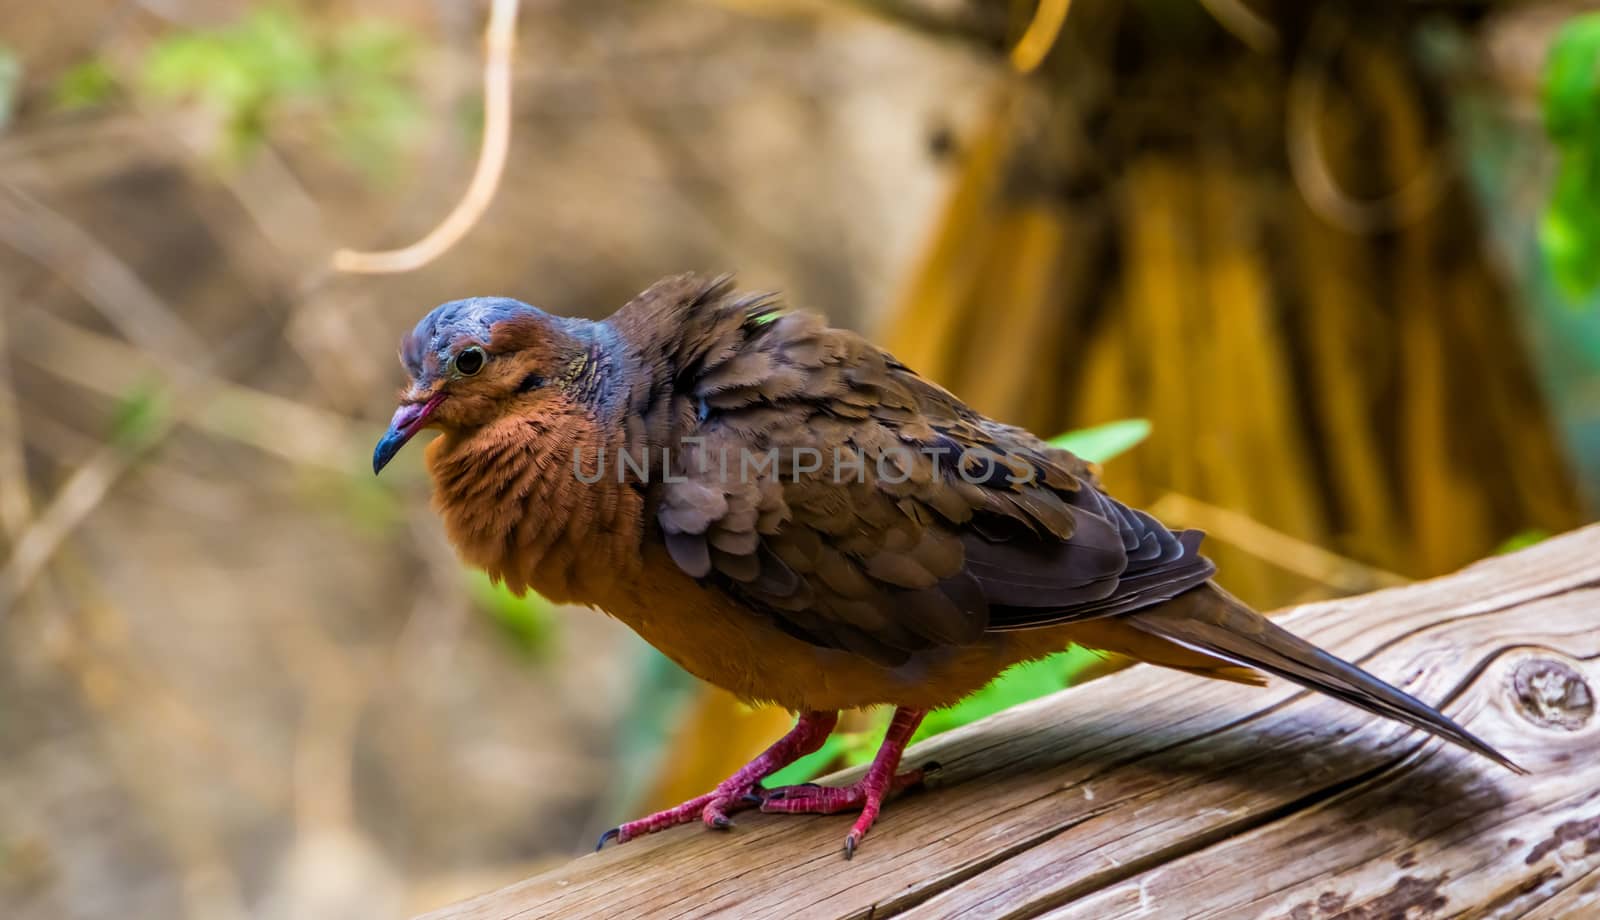 beautiful portrait of a socorro dove from the side, Pigeon that is extinct in the wild, Tropical bird specie that lived on socorro island, Mexico by charlottebleijenberg